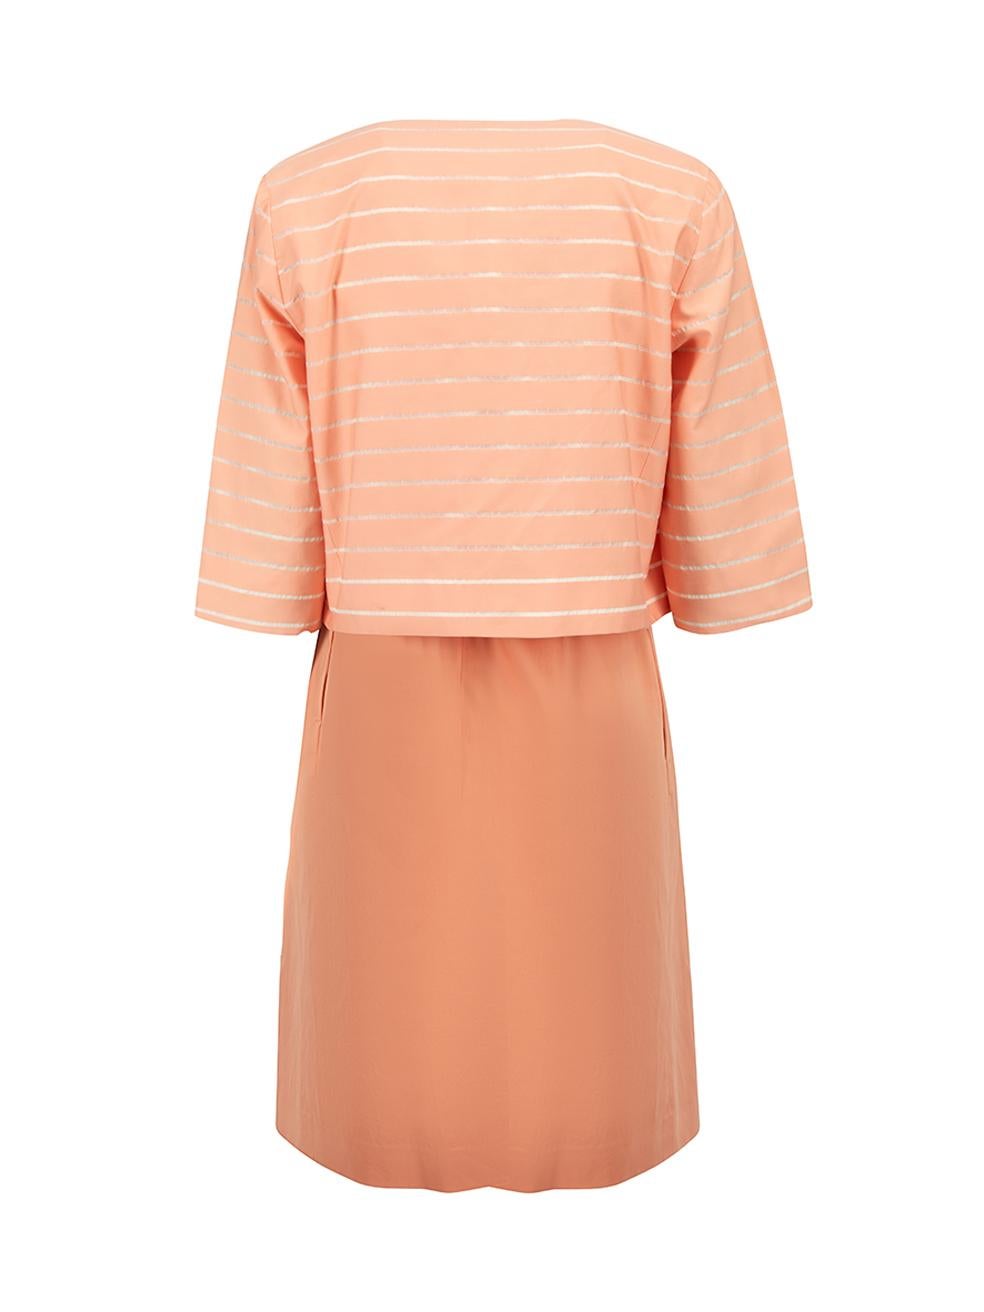 Orange Weekend Max Mara Salmon Pink Cotton Dress with Jacket Size L For Sale